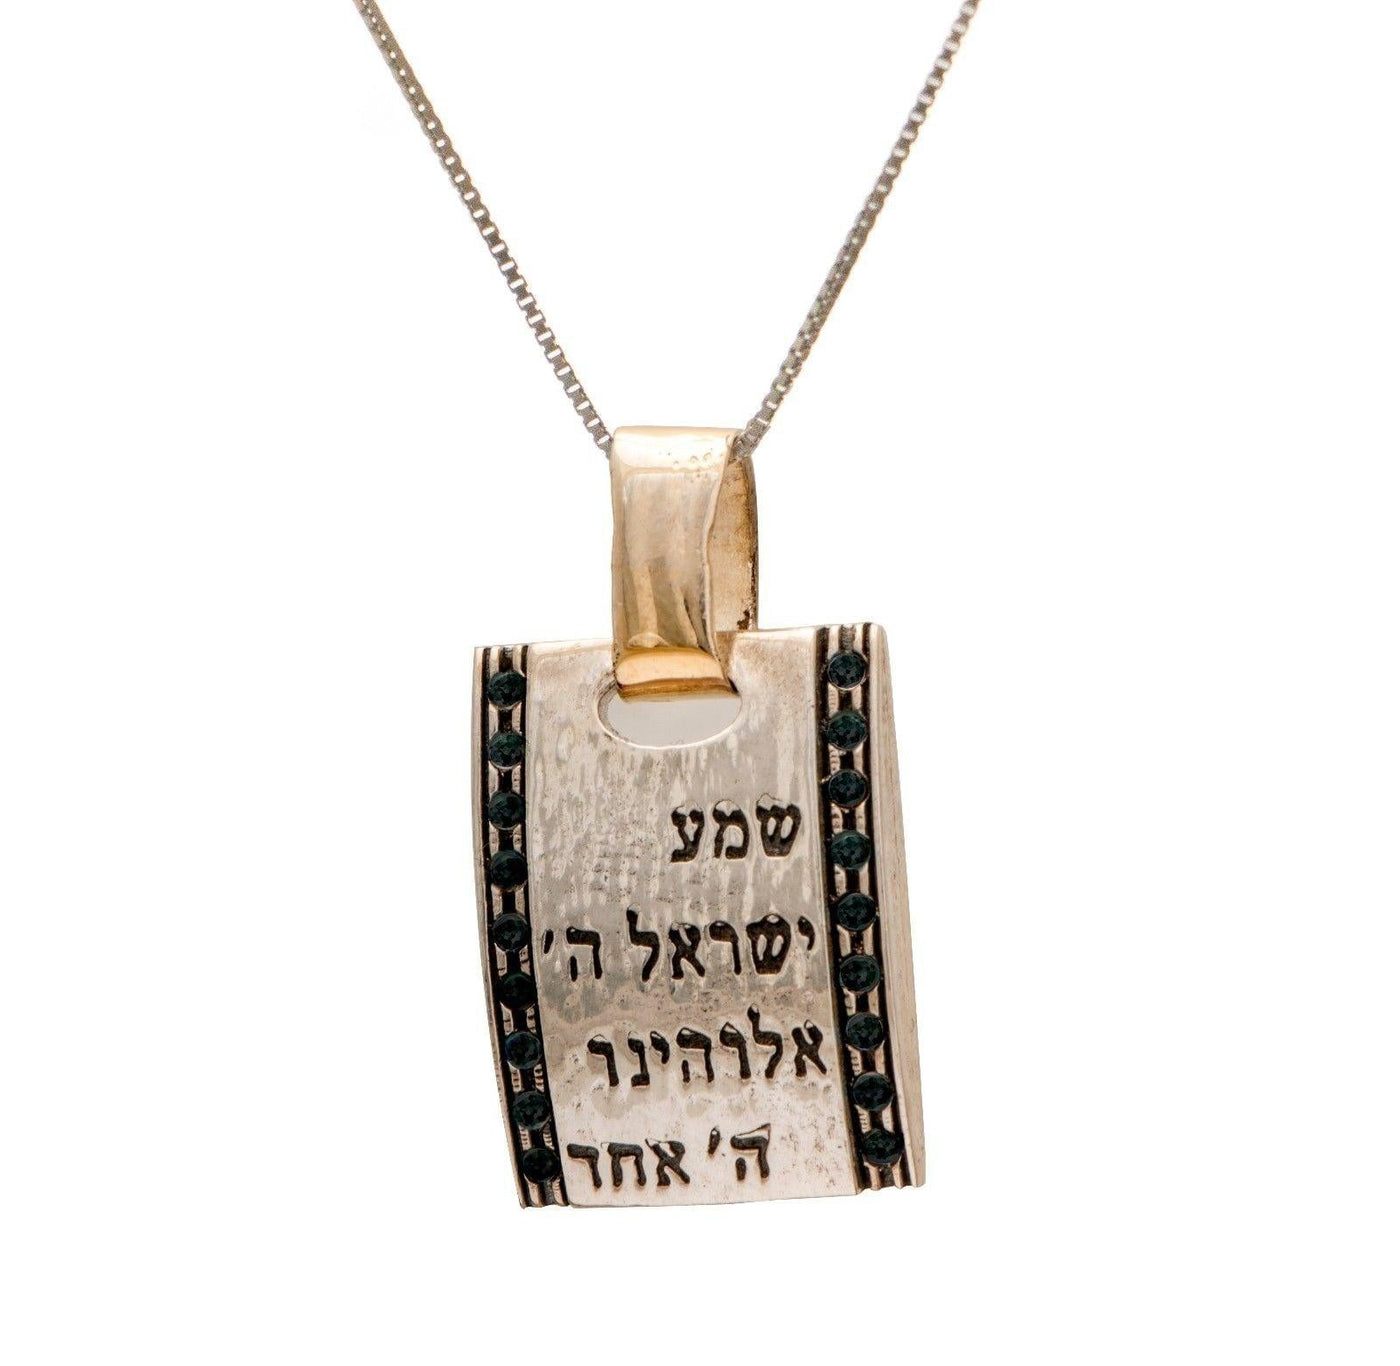 Gold and Silver Religious Necklace With Pendant with Hebrew BIBLE Quote #33 - Spring Nahal